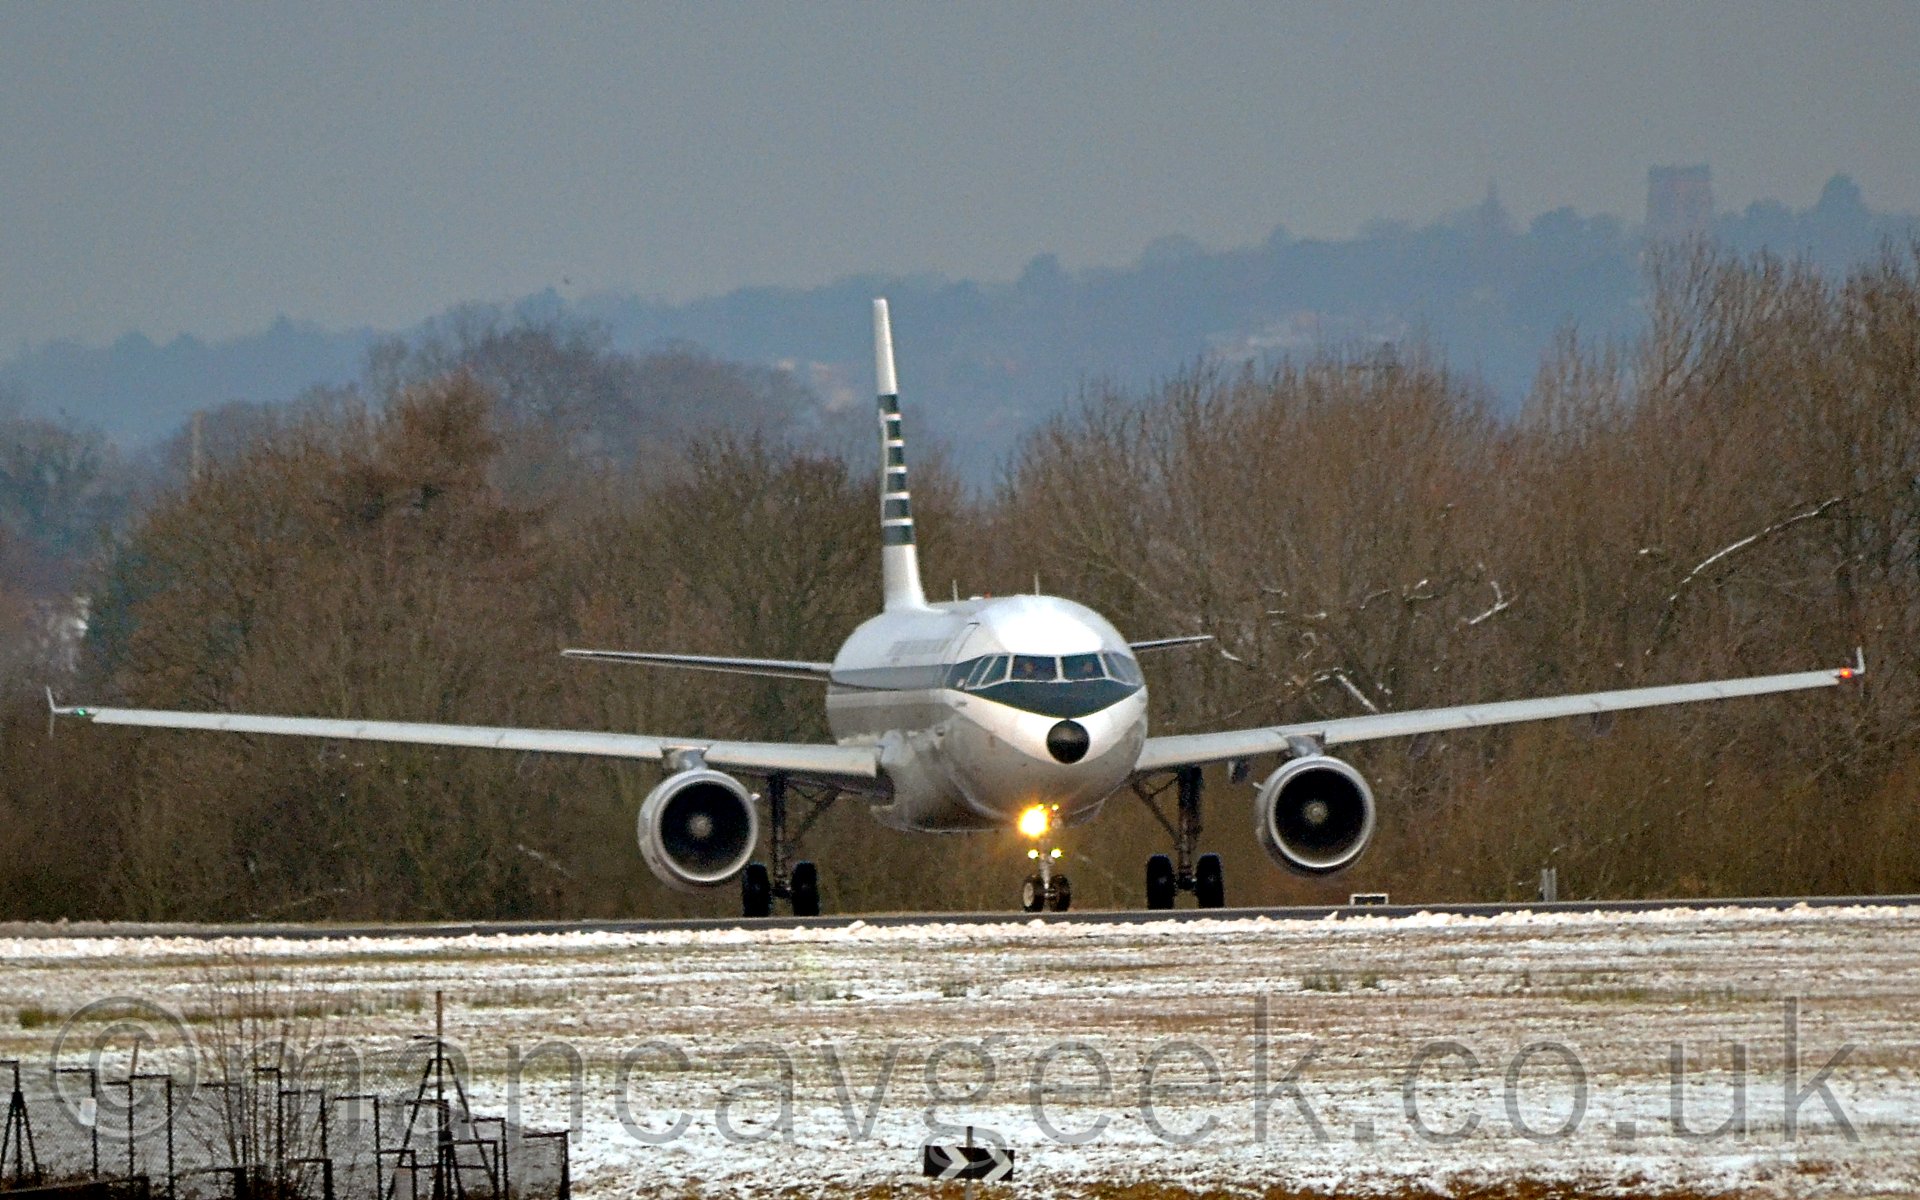 Almost head-on shot of a white and dark green, twin engined jhet airliner, taxiing from left to right, pointing just off to ther right of the camera, the landing light on the nosewheel flaring down the lens. A light dusting of snow covers grass in the foreground, with trees in the background, under a grey sky.